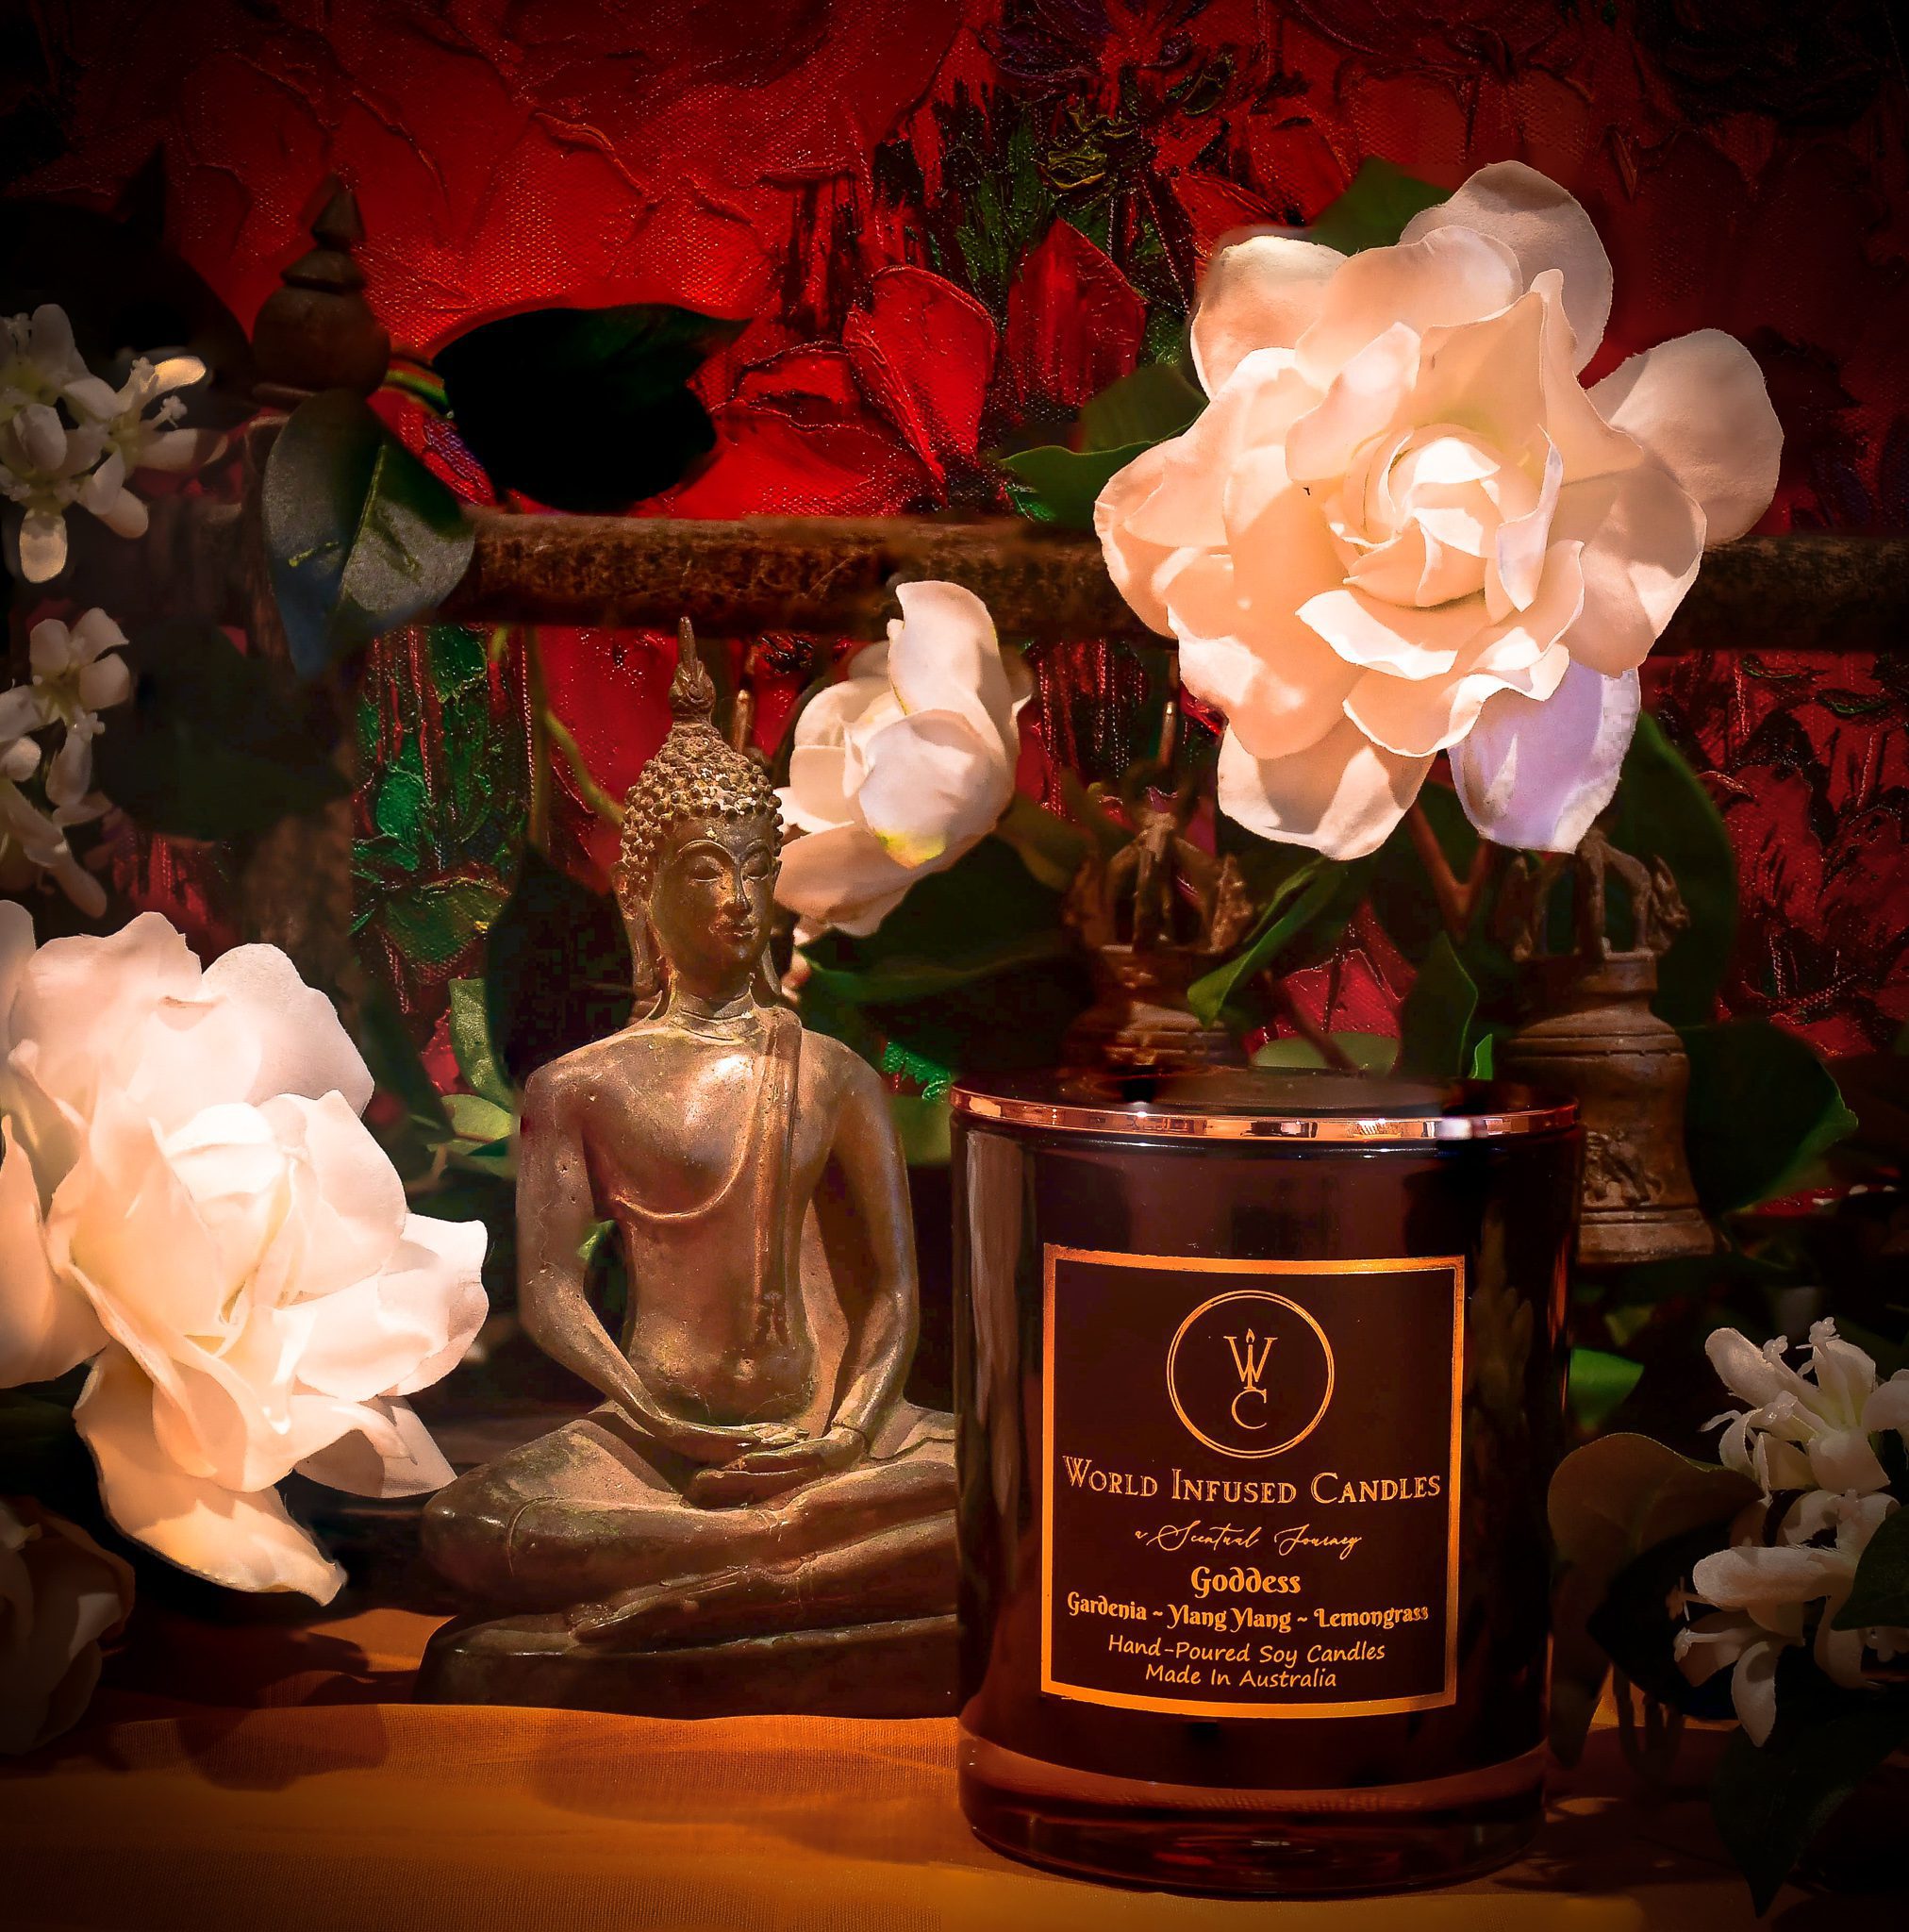 Goddess, This Gardenia Candle is combined with Ylang-Ylang and Lemongrass